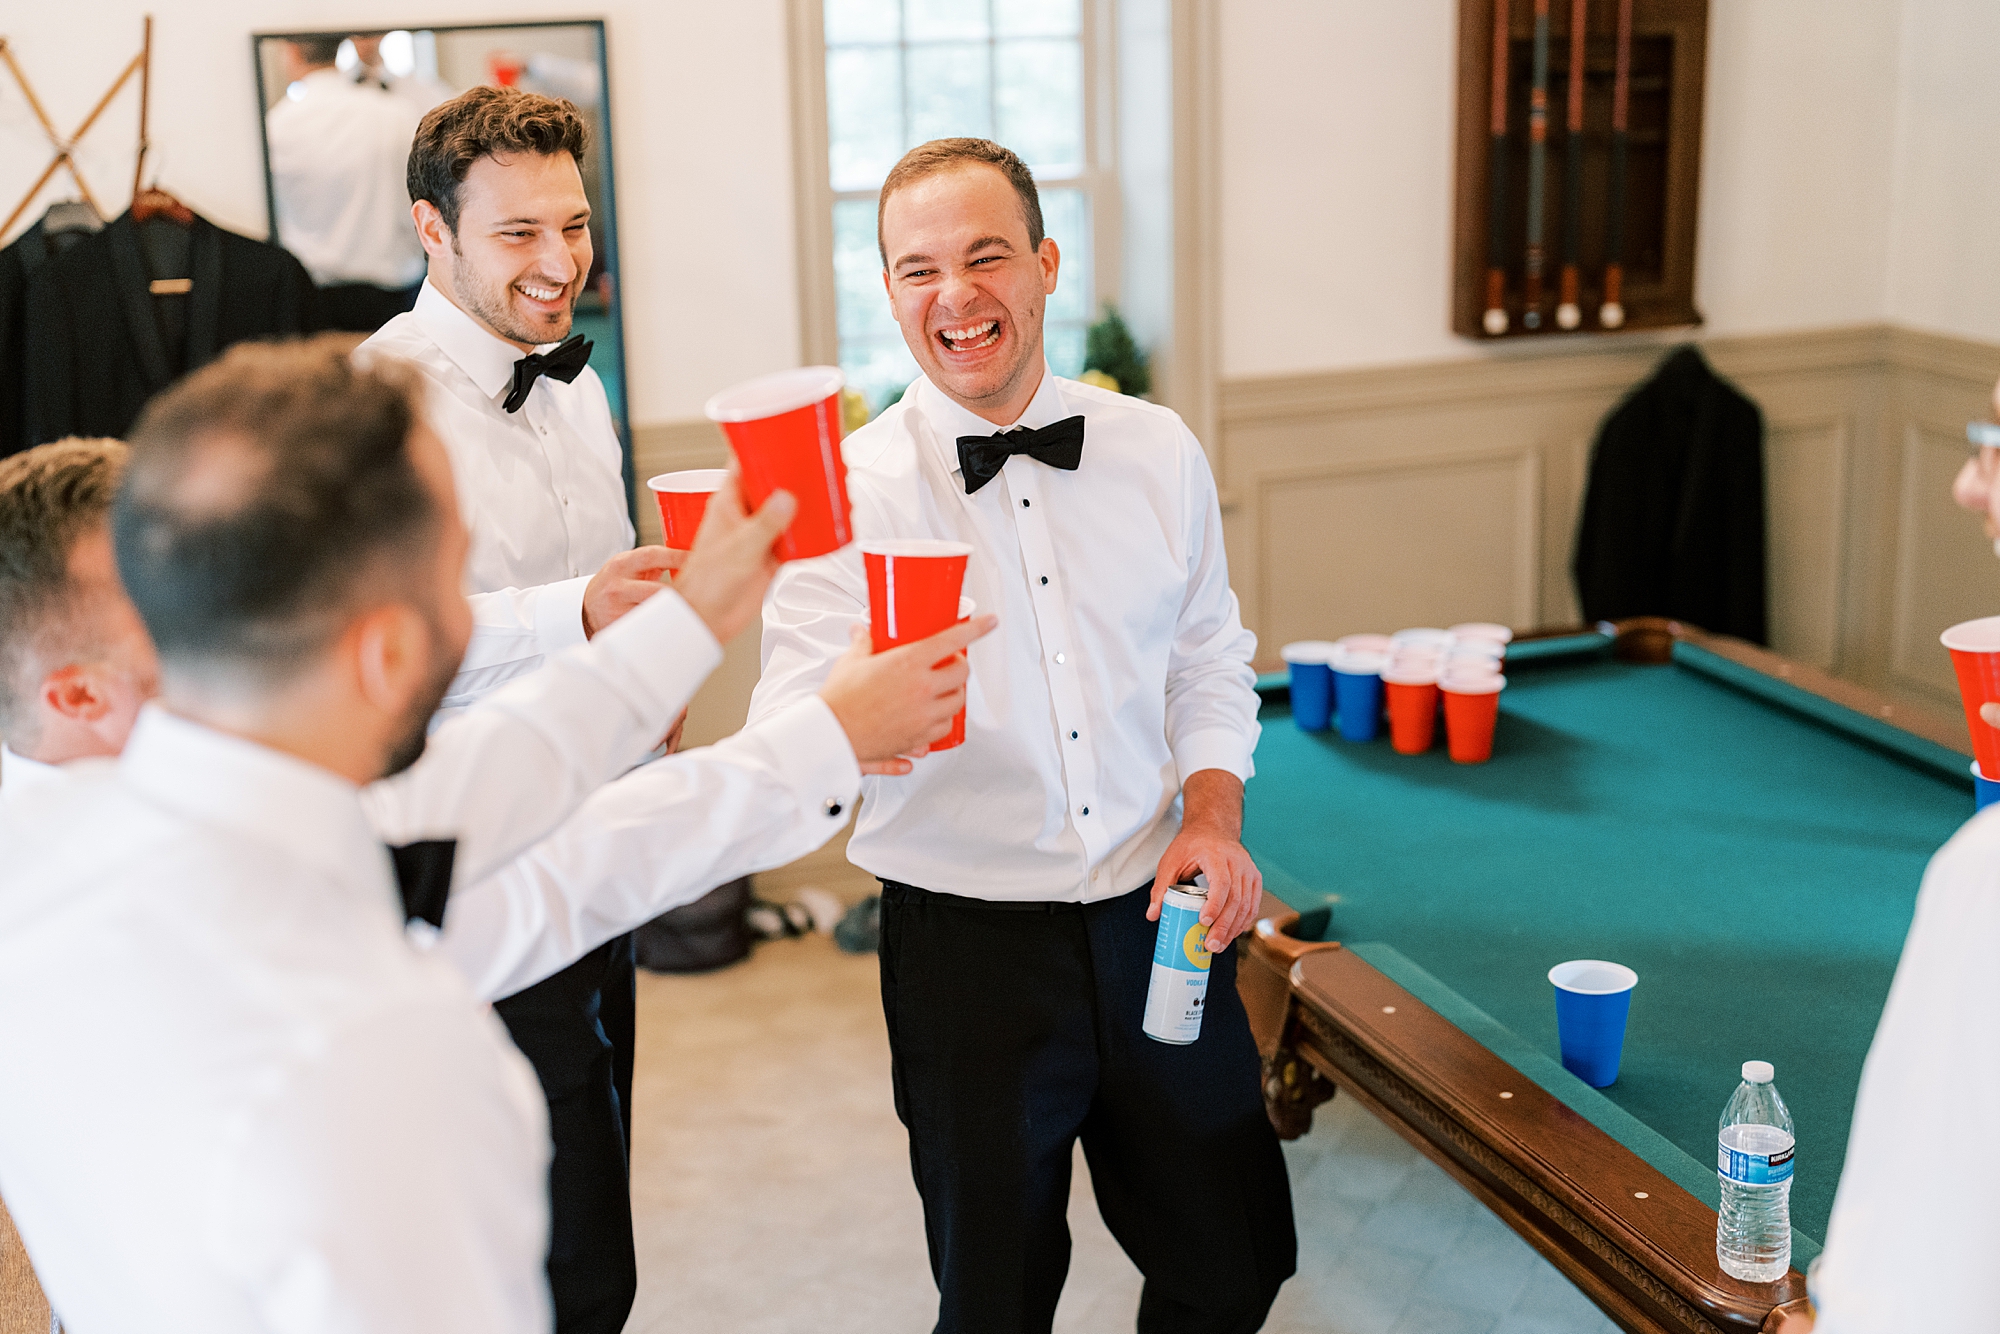 groomsmen laugh together with red solo cups by pool table 